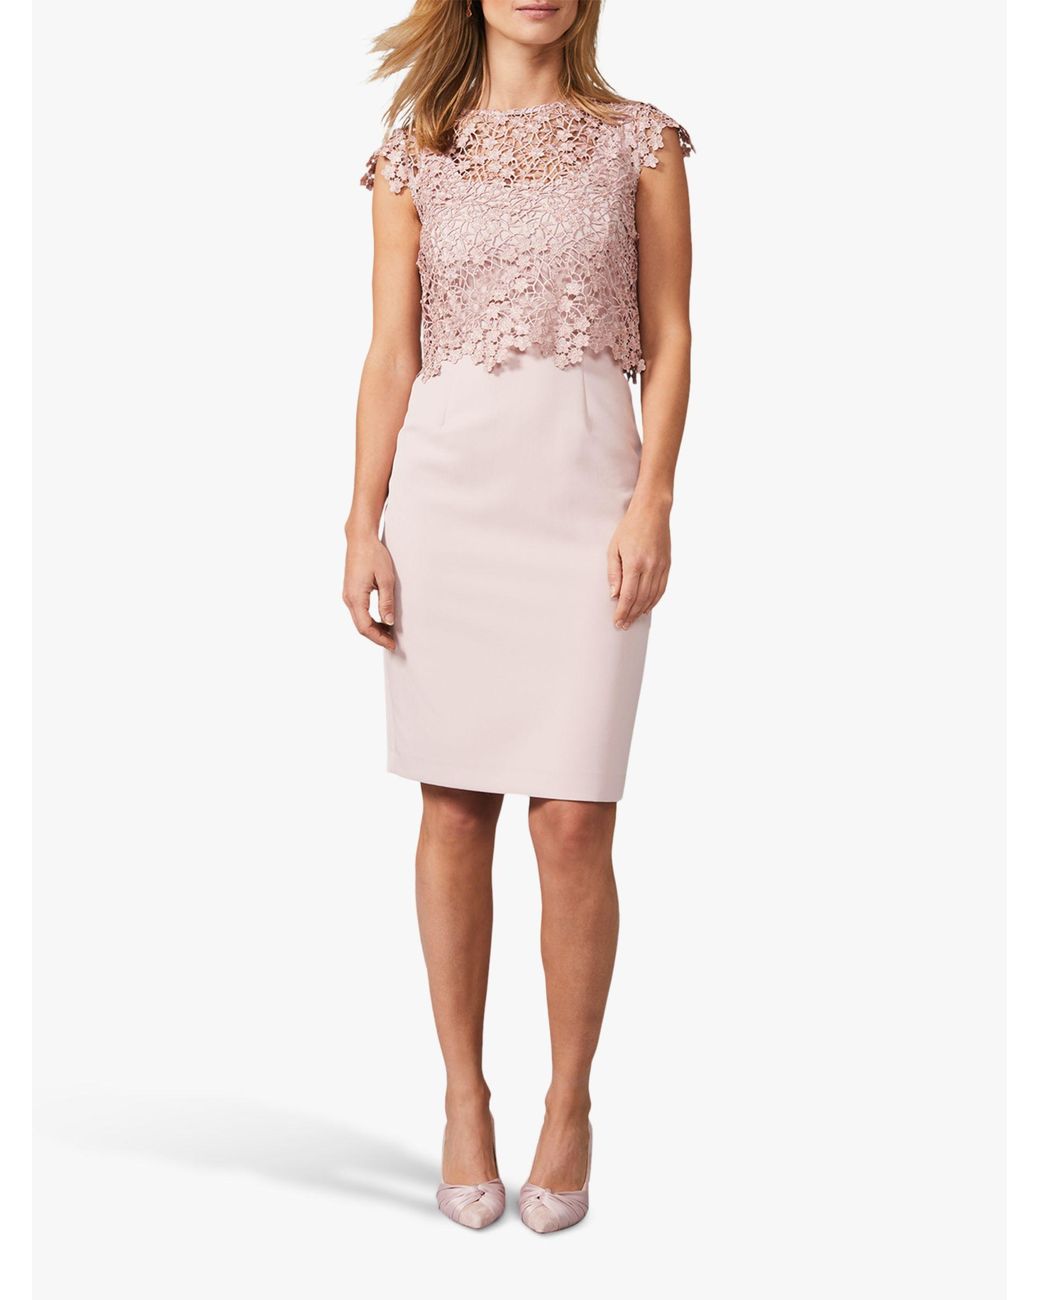 Phase Eight Lace Mariposa Double Layered Dress in Antique Rose (Pink) - Lyst